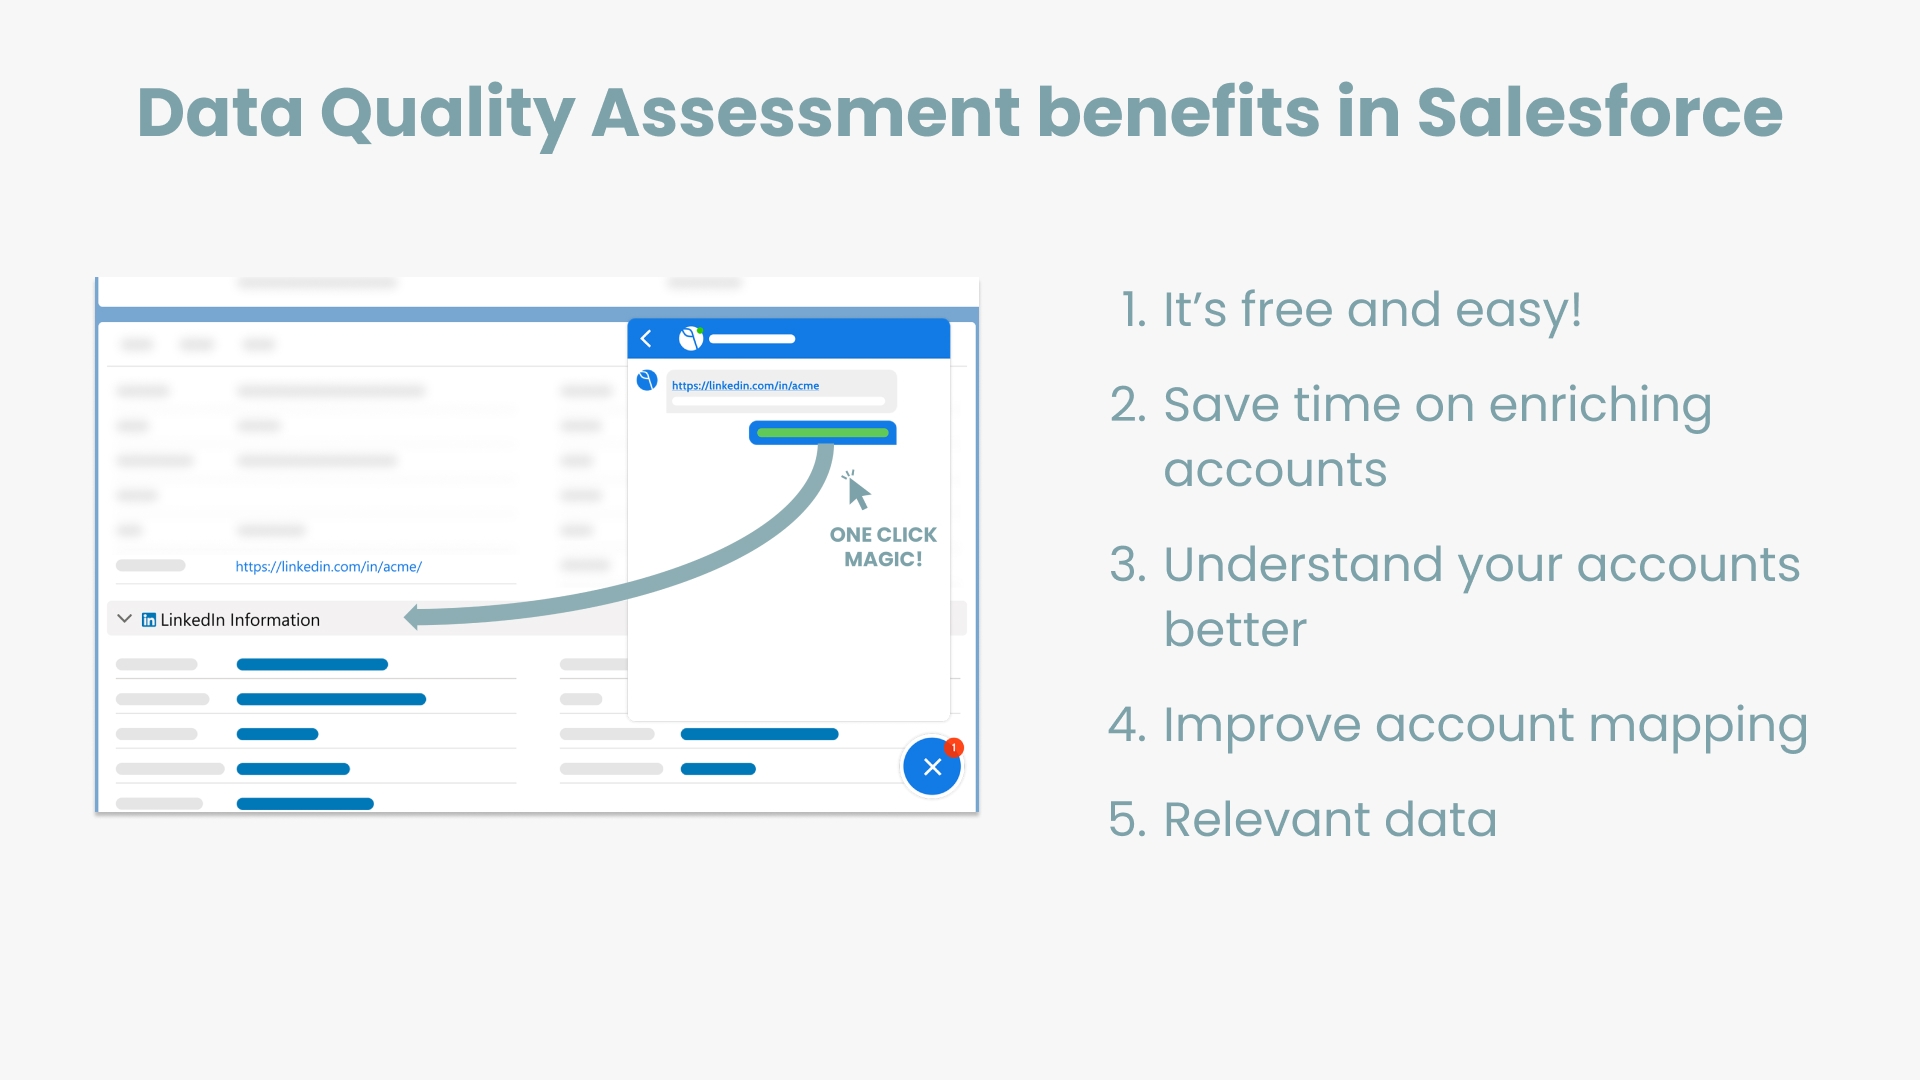 The benefits of enriching your Salesforce database include it being free and easy, saves users time from manually copying, provides greater insights into unknown or unfamiliar Account, and improves segmentation and personalization efforts.